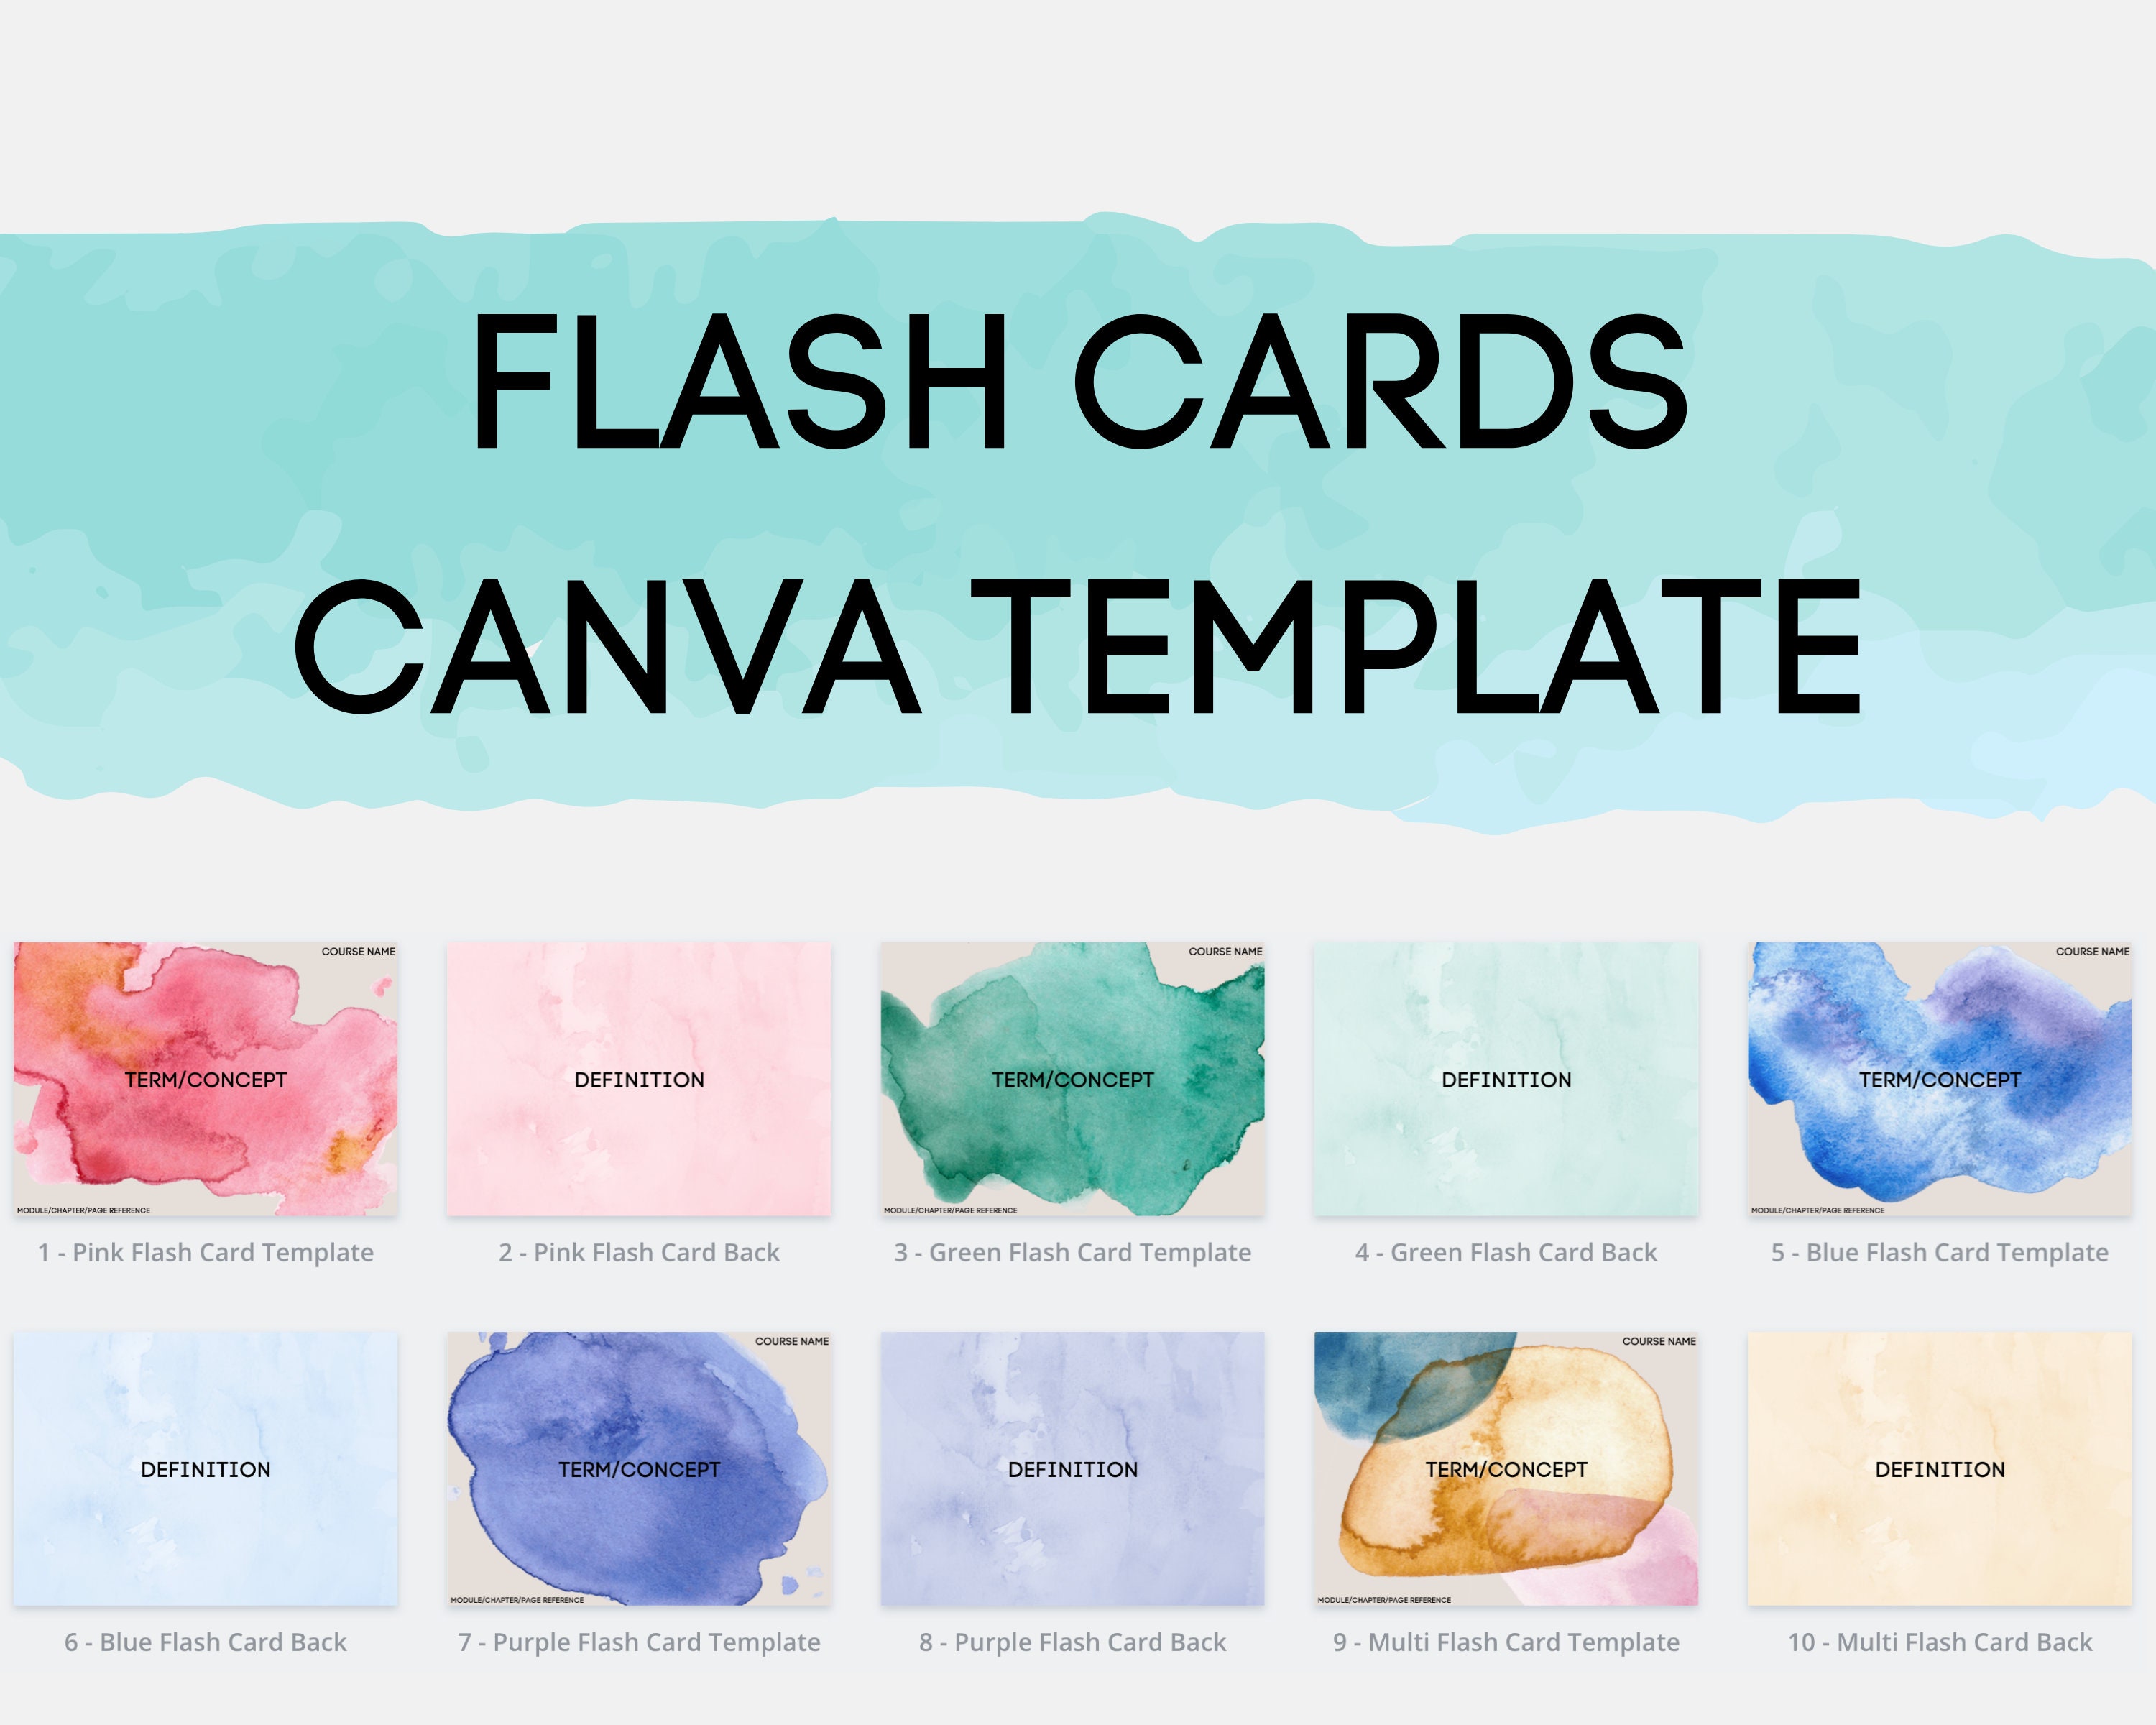 Custom Flashcards  Design, Print, and Share Flashcards with Canva